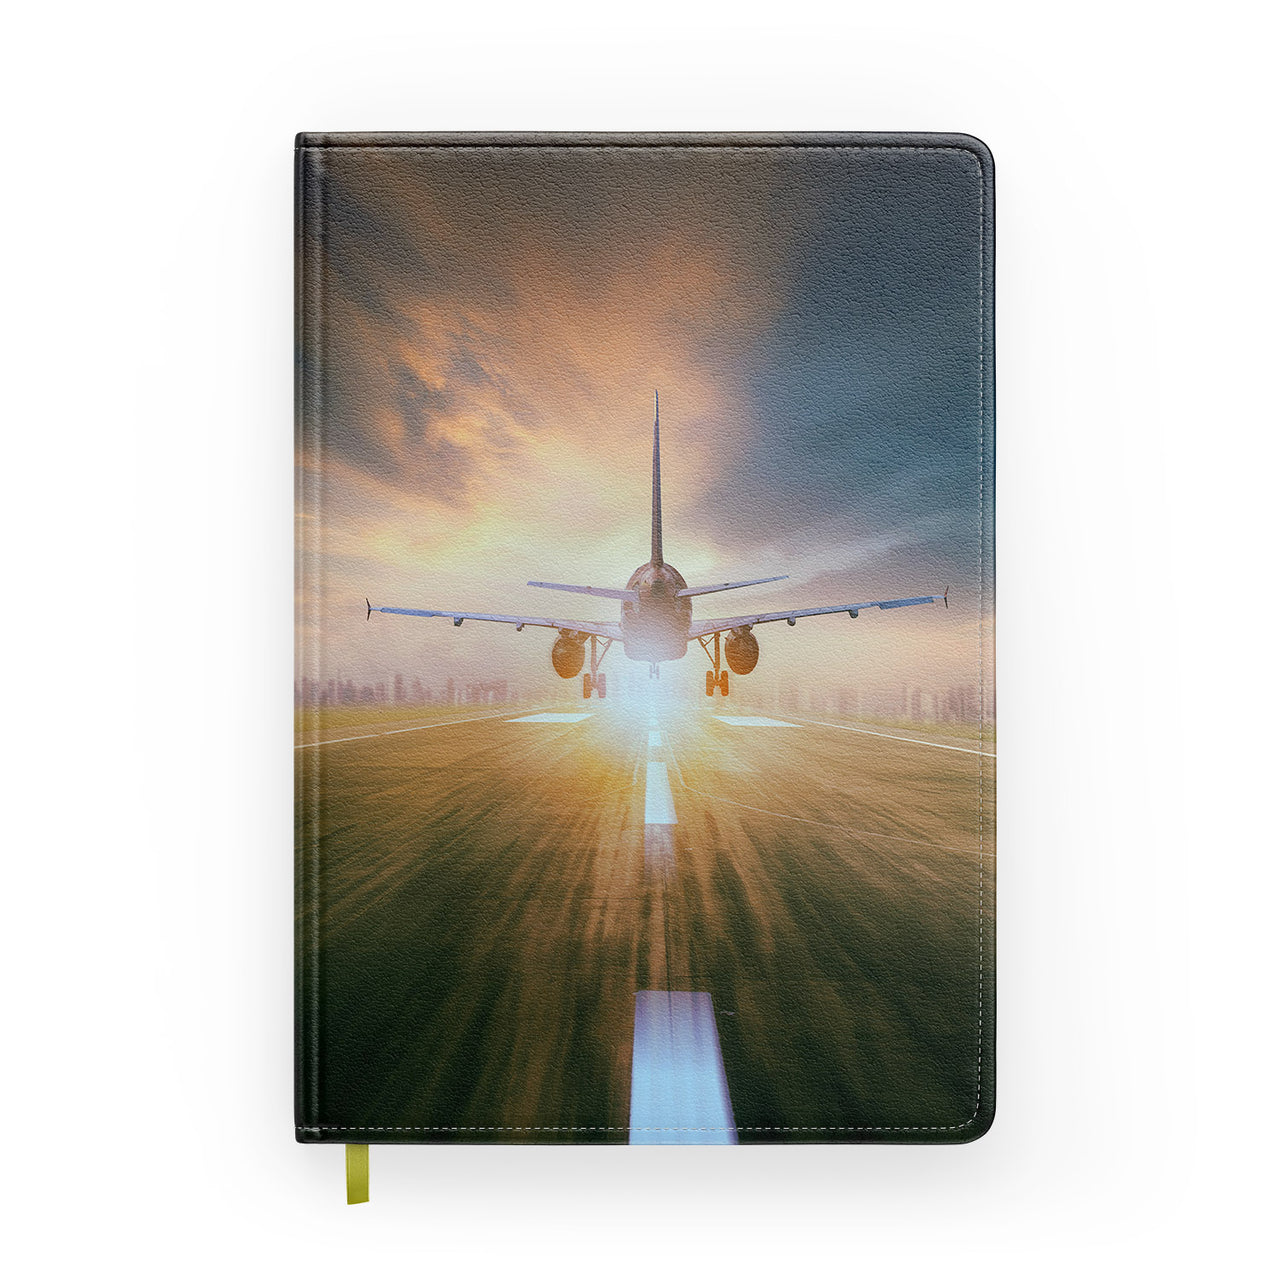 Airplane Flying Over Runway Designed Notebooks